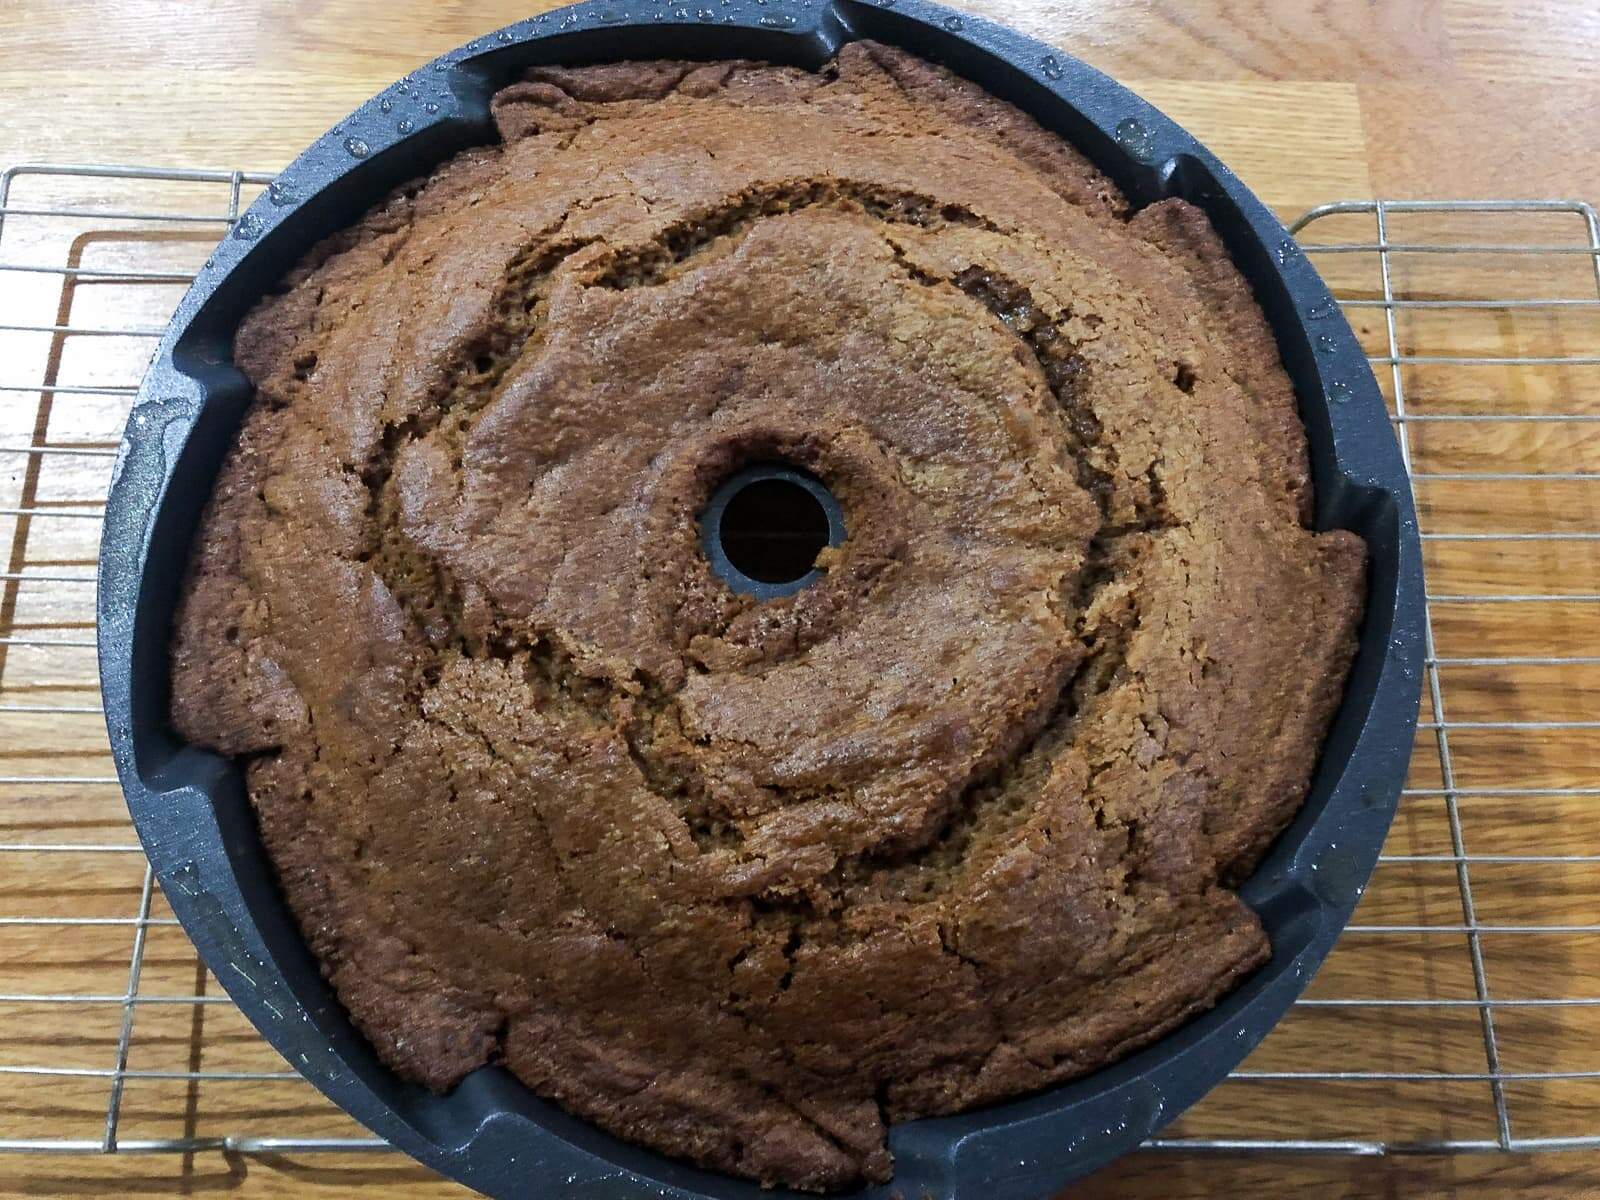 A pumpkin spice cake in a bundt tin just out of the oven on a wire rack cooling.